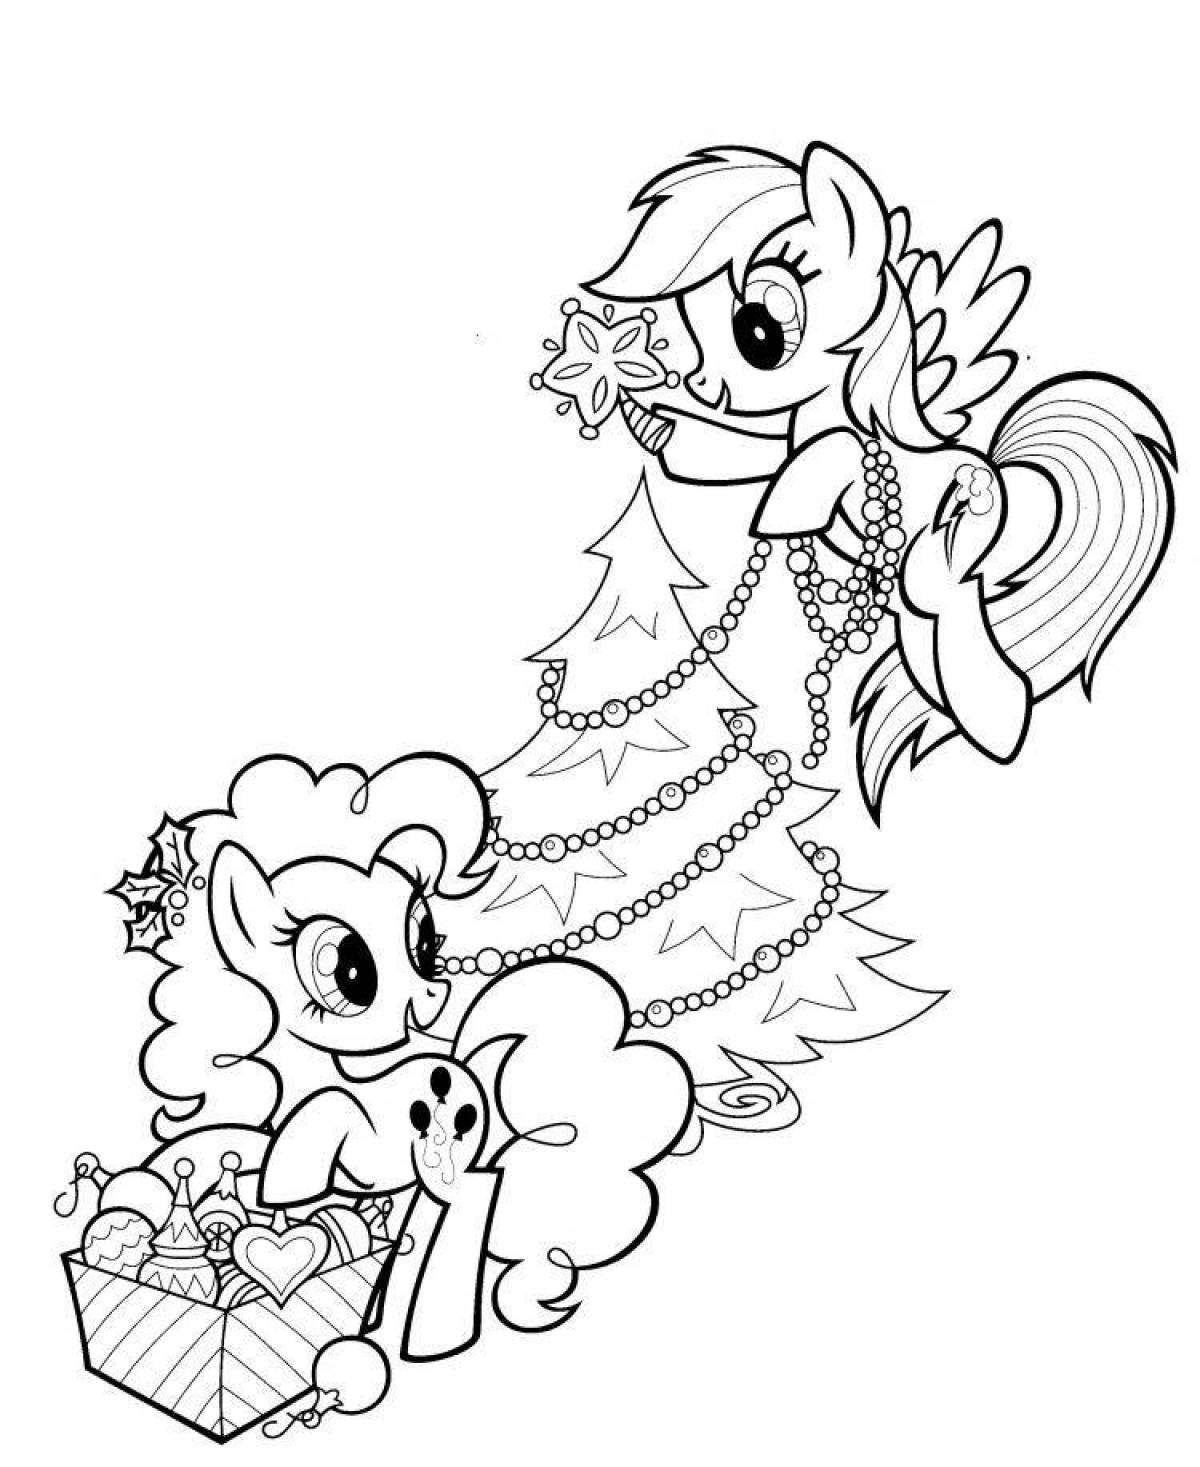 Glittering Christmas ponies coloring page